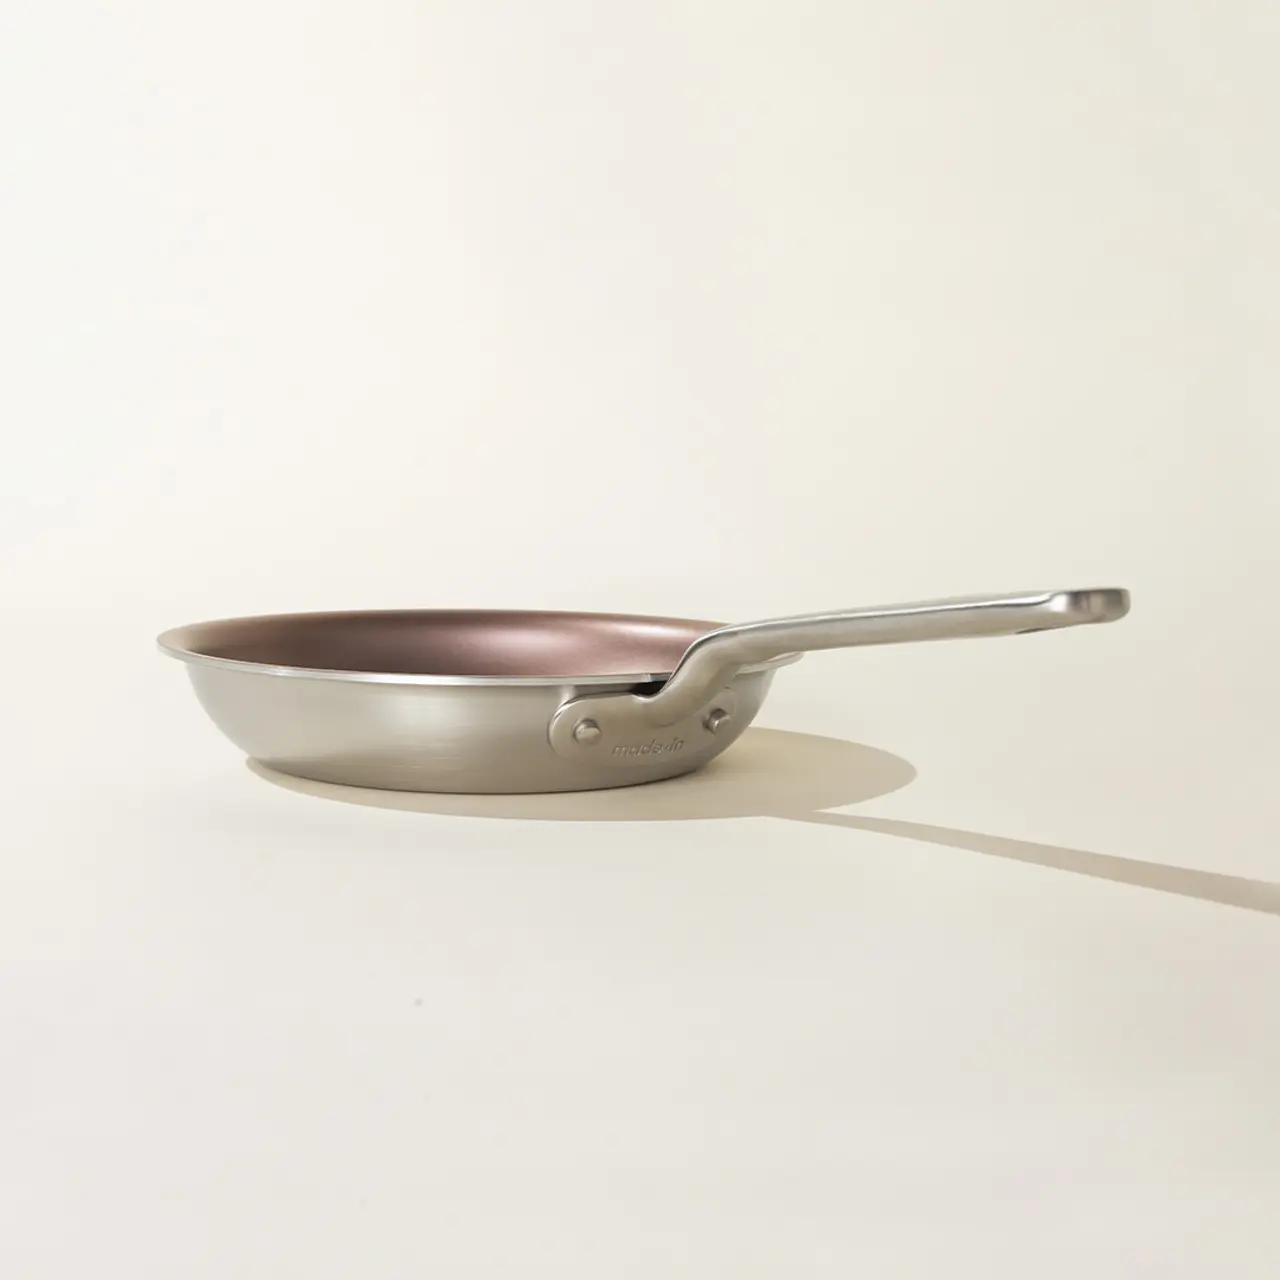 A stainless steel frying pan with a copper interior is placed against a neutral background, casting a soft shadow to one side.